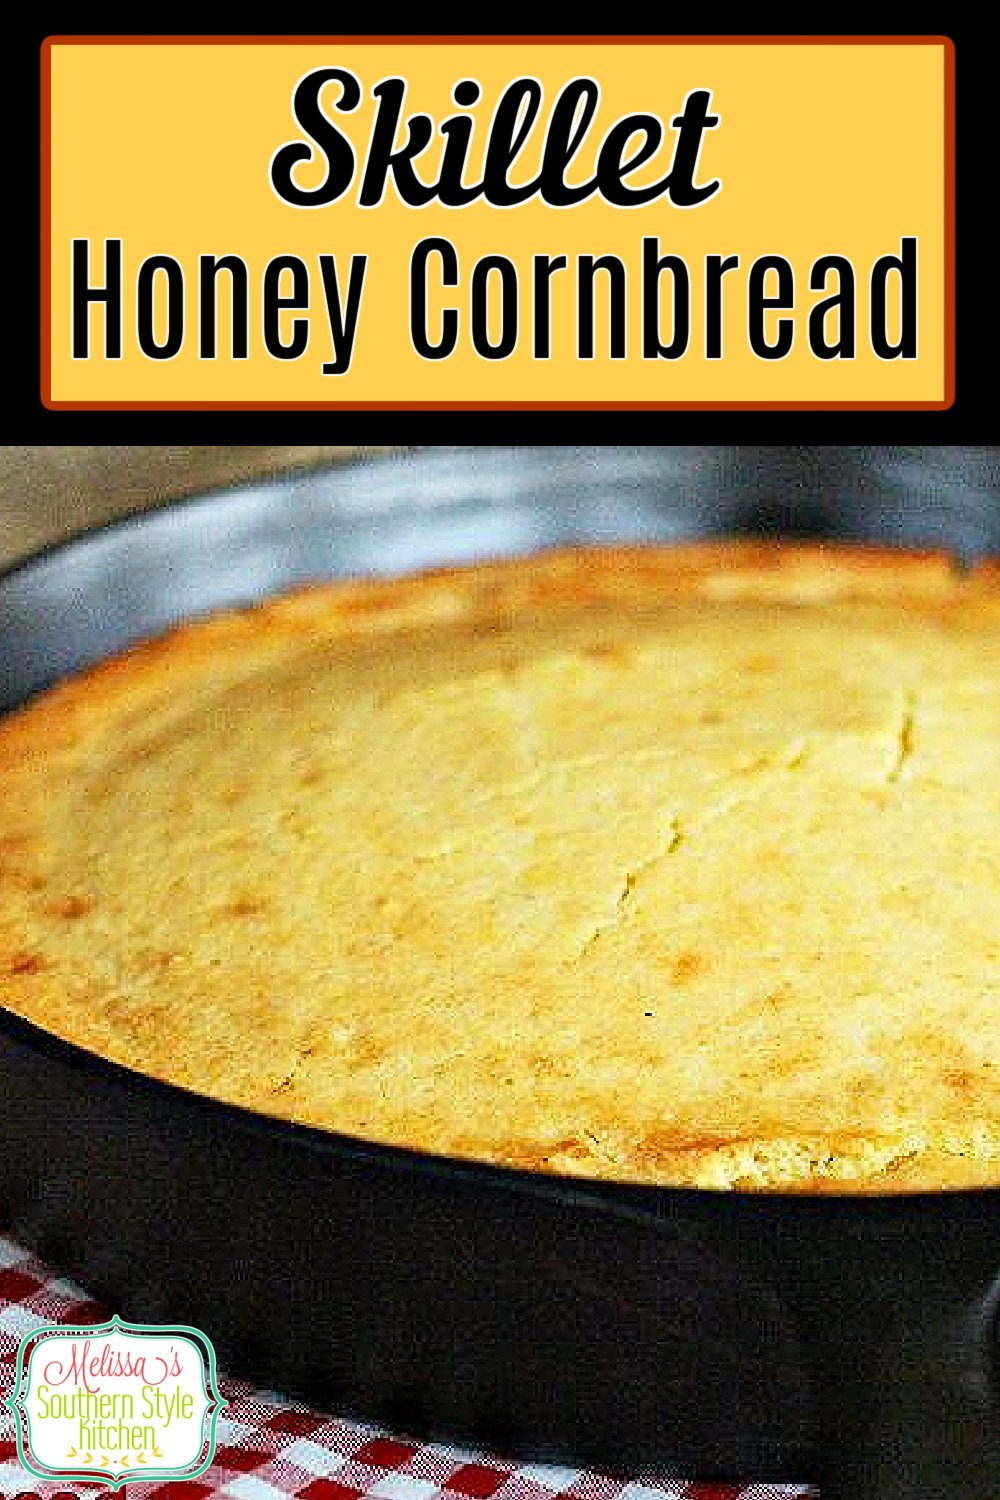 Enjoy this Skillet Honey Cornbread with beans, barbecue, soup, stew and beyond #cornbread #honeycornbread #cornbreadrecipes #breadrecipes #southernfood #southernrecipes #castironcooking #skilletcornbread #dinnerideas #dinner via @melissasssk